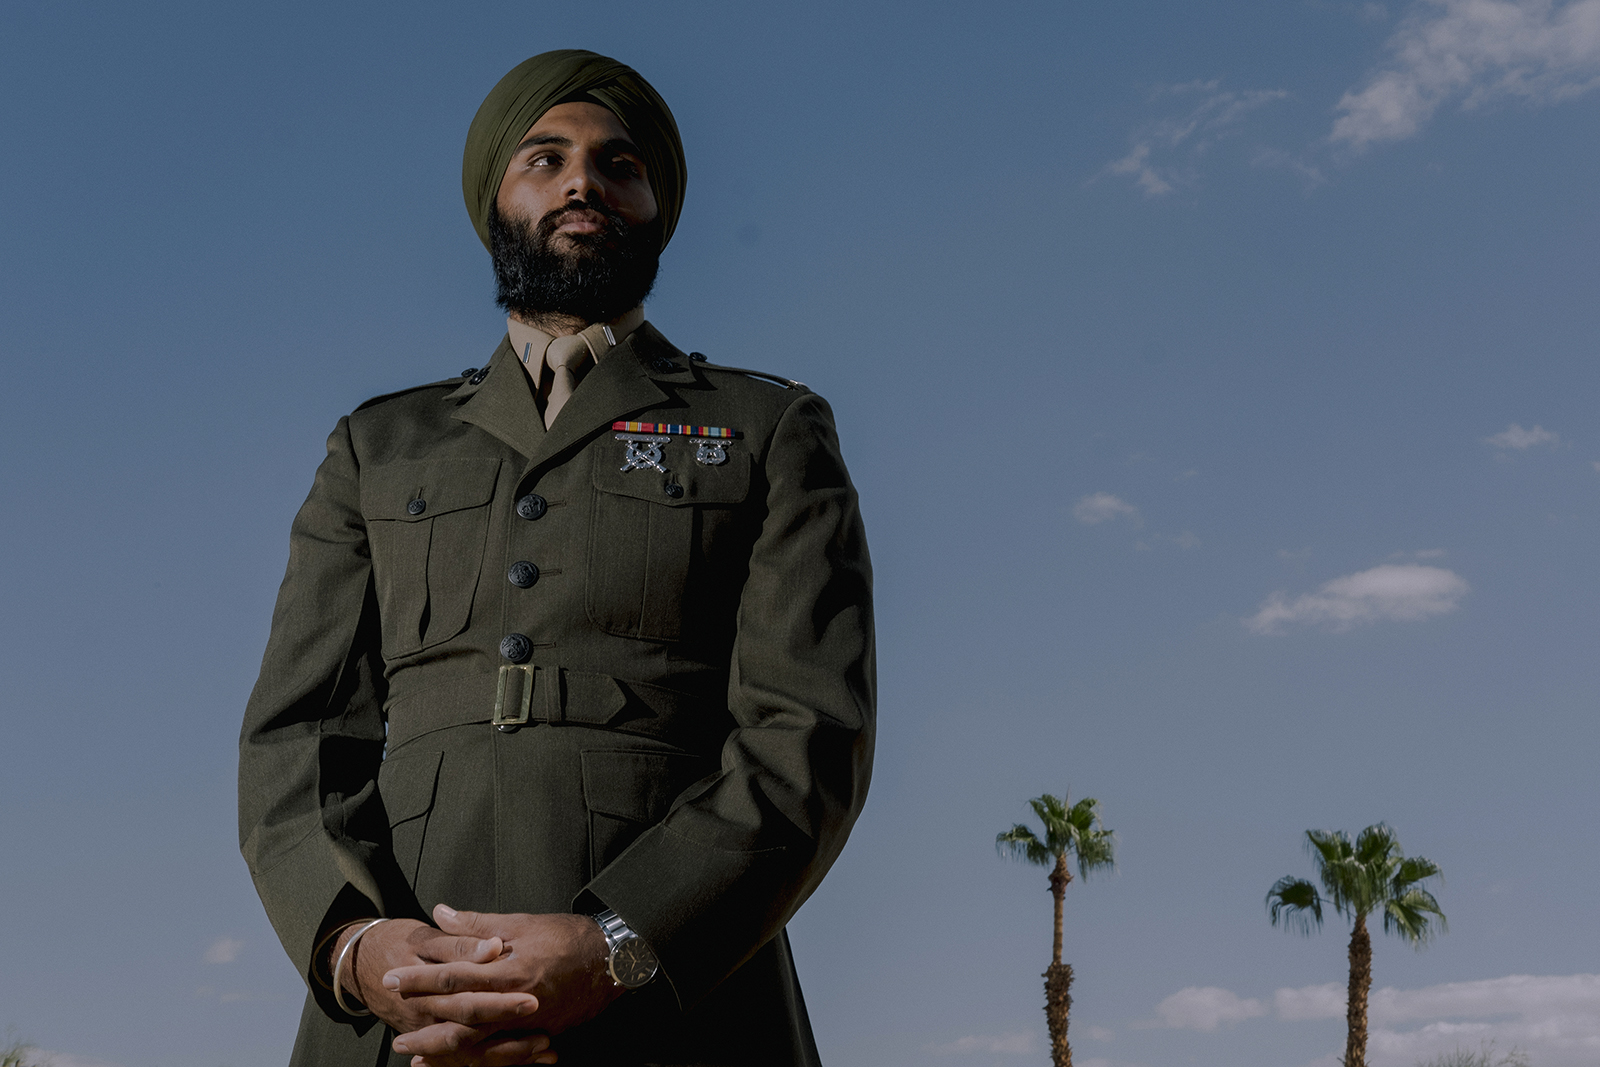 Capt. Sukhbir Singh Toor in Palm Springs, California, on Oct. 18, 2021. Photo by Mark Abramson for the Sikh Coalition